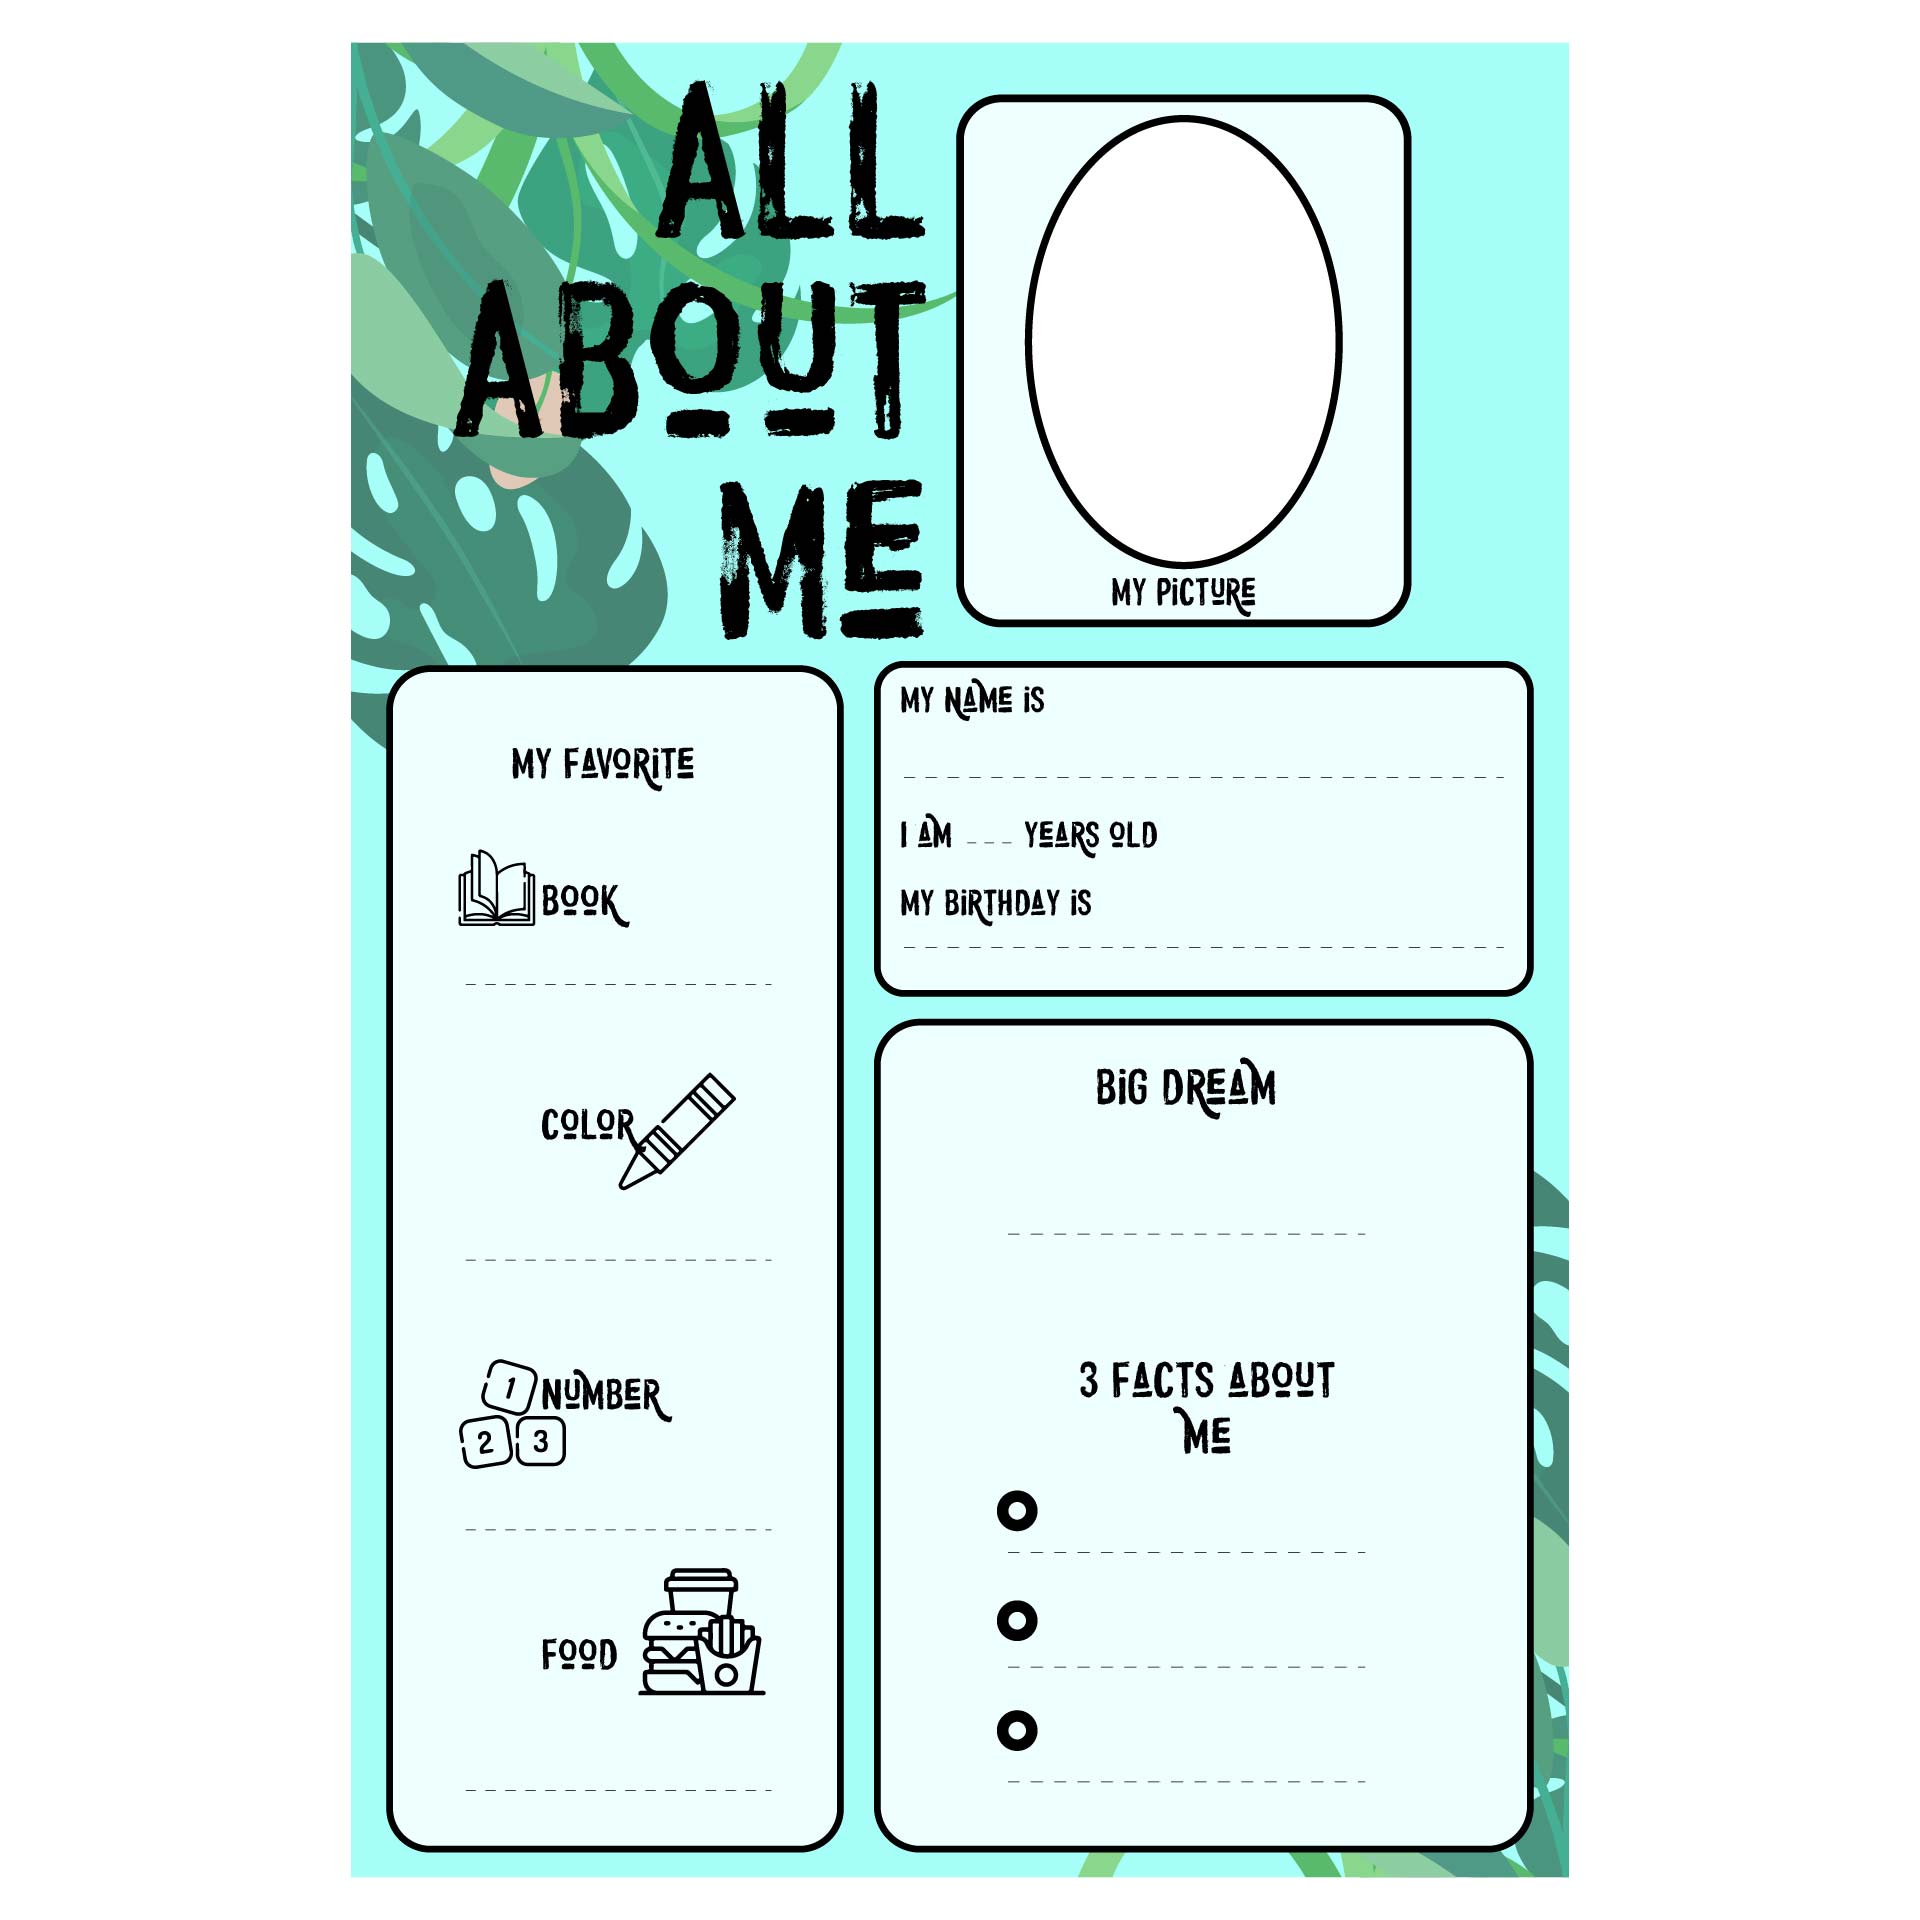 All About Me Student Profile Sheet